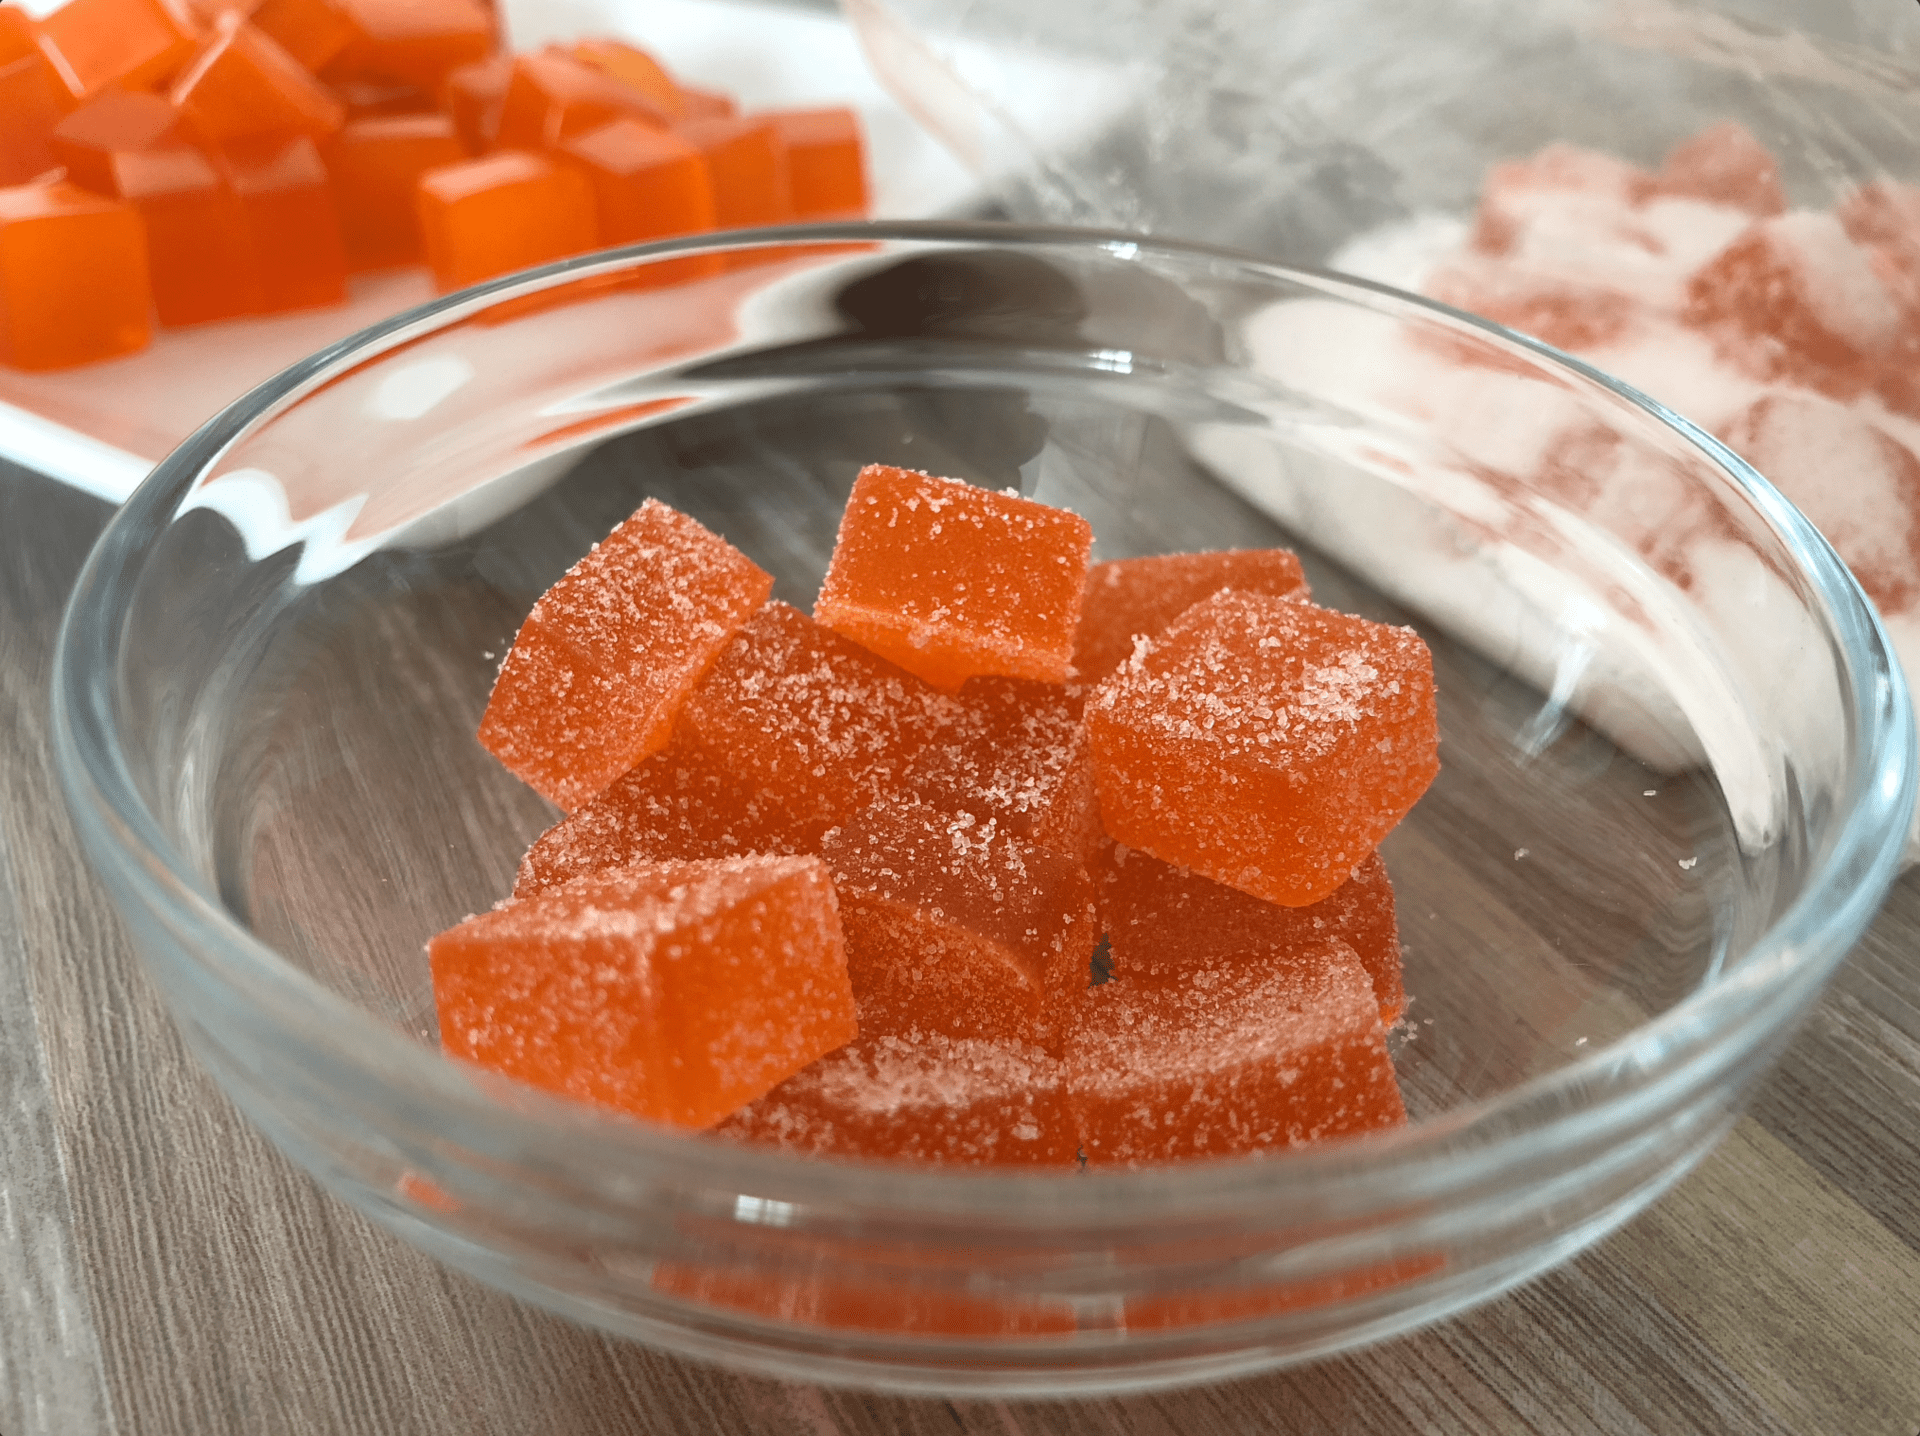 How to Make The Best Sour Gummy Bears Infused With Cannabis. A sweet and sour coating made with citric acid and sugar.